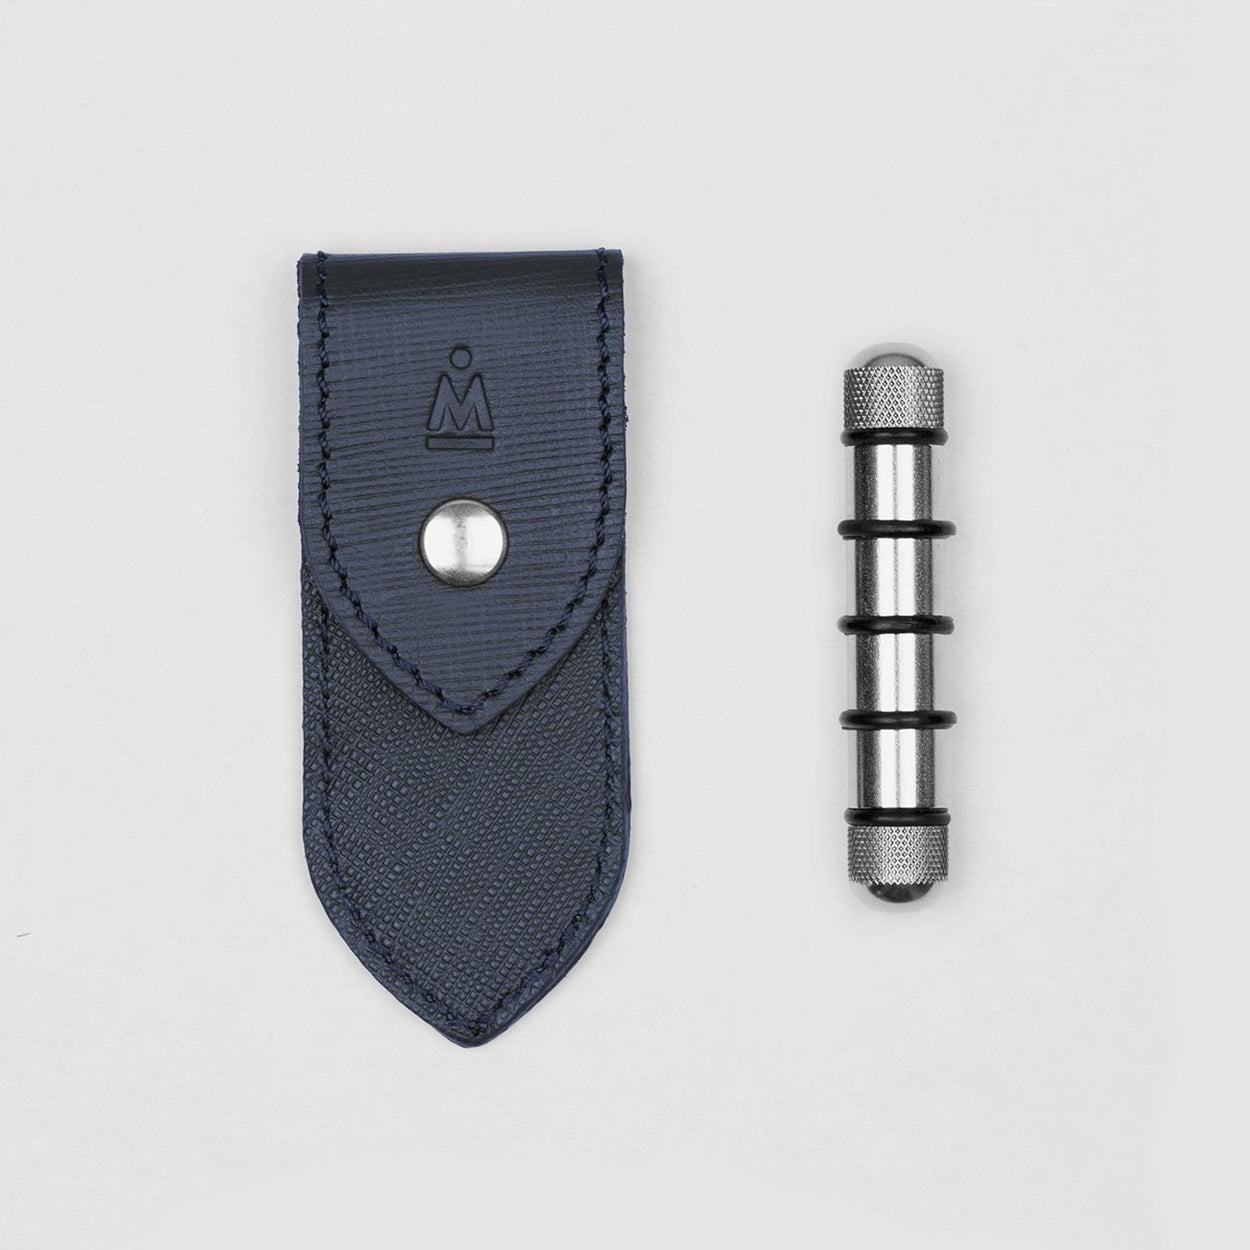 Spring Bar Tool + Oxford Blue Pouch